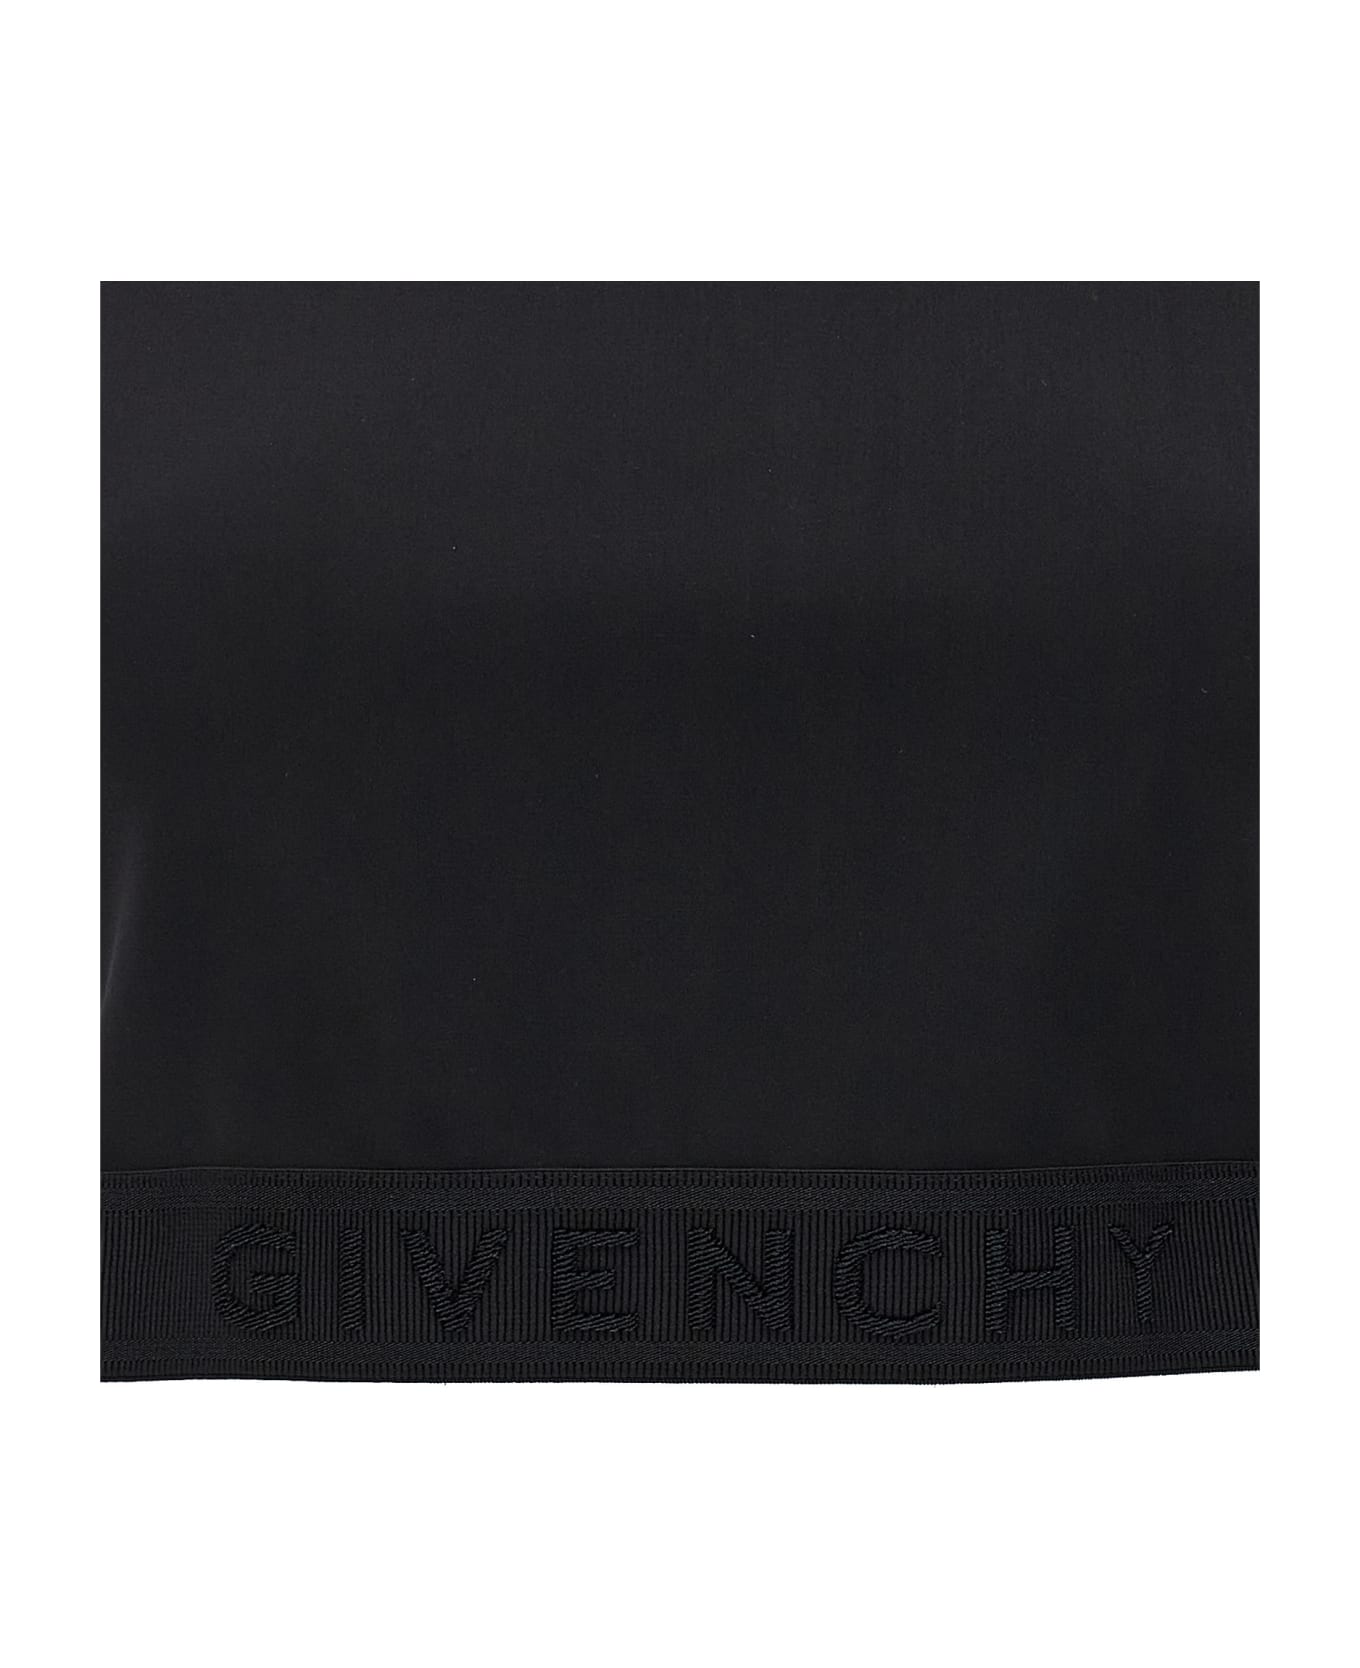 Givenchy Cropped T-shirt - Black Tシャツ